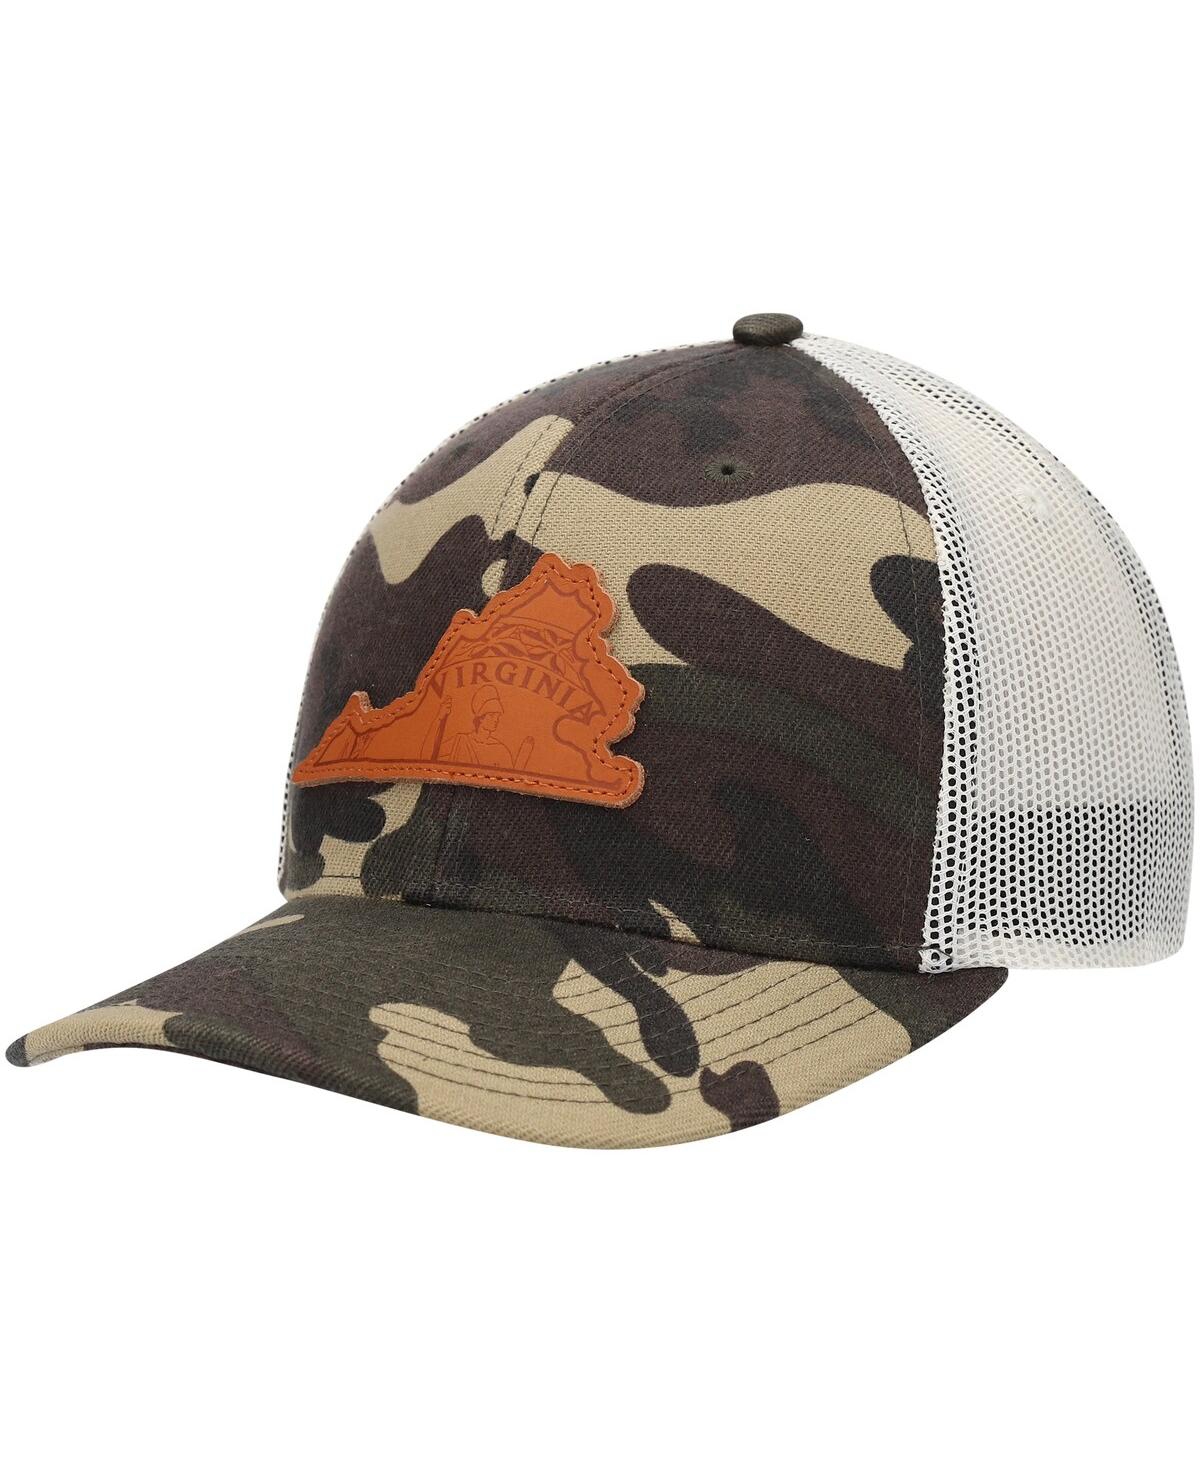 Men's Local Crowns Camo Virginia Icon Woodland State Patch Trucker Snapback Hat - Camo